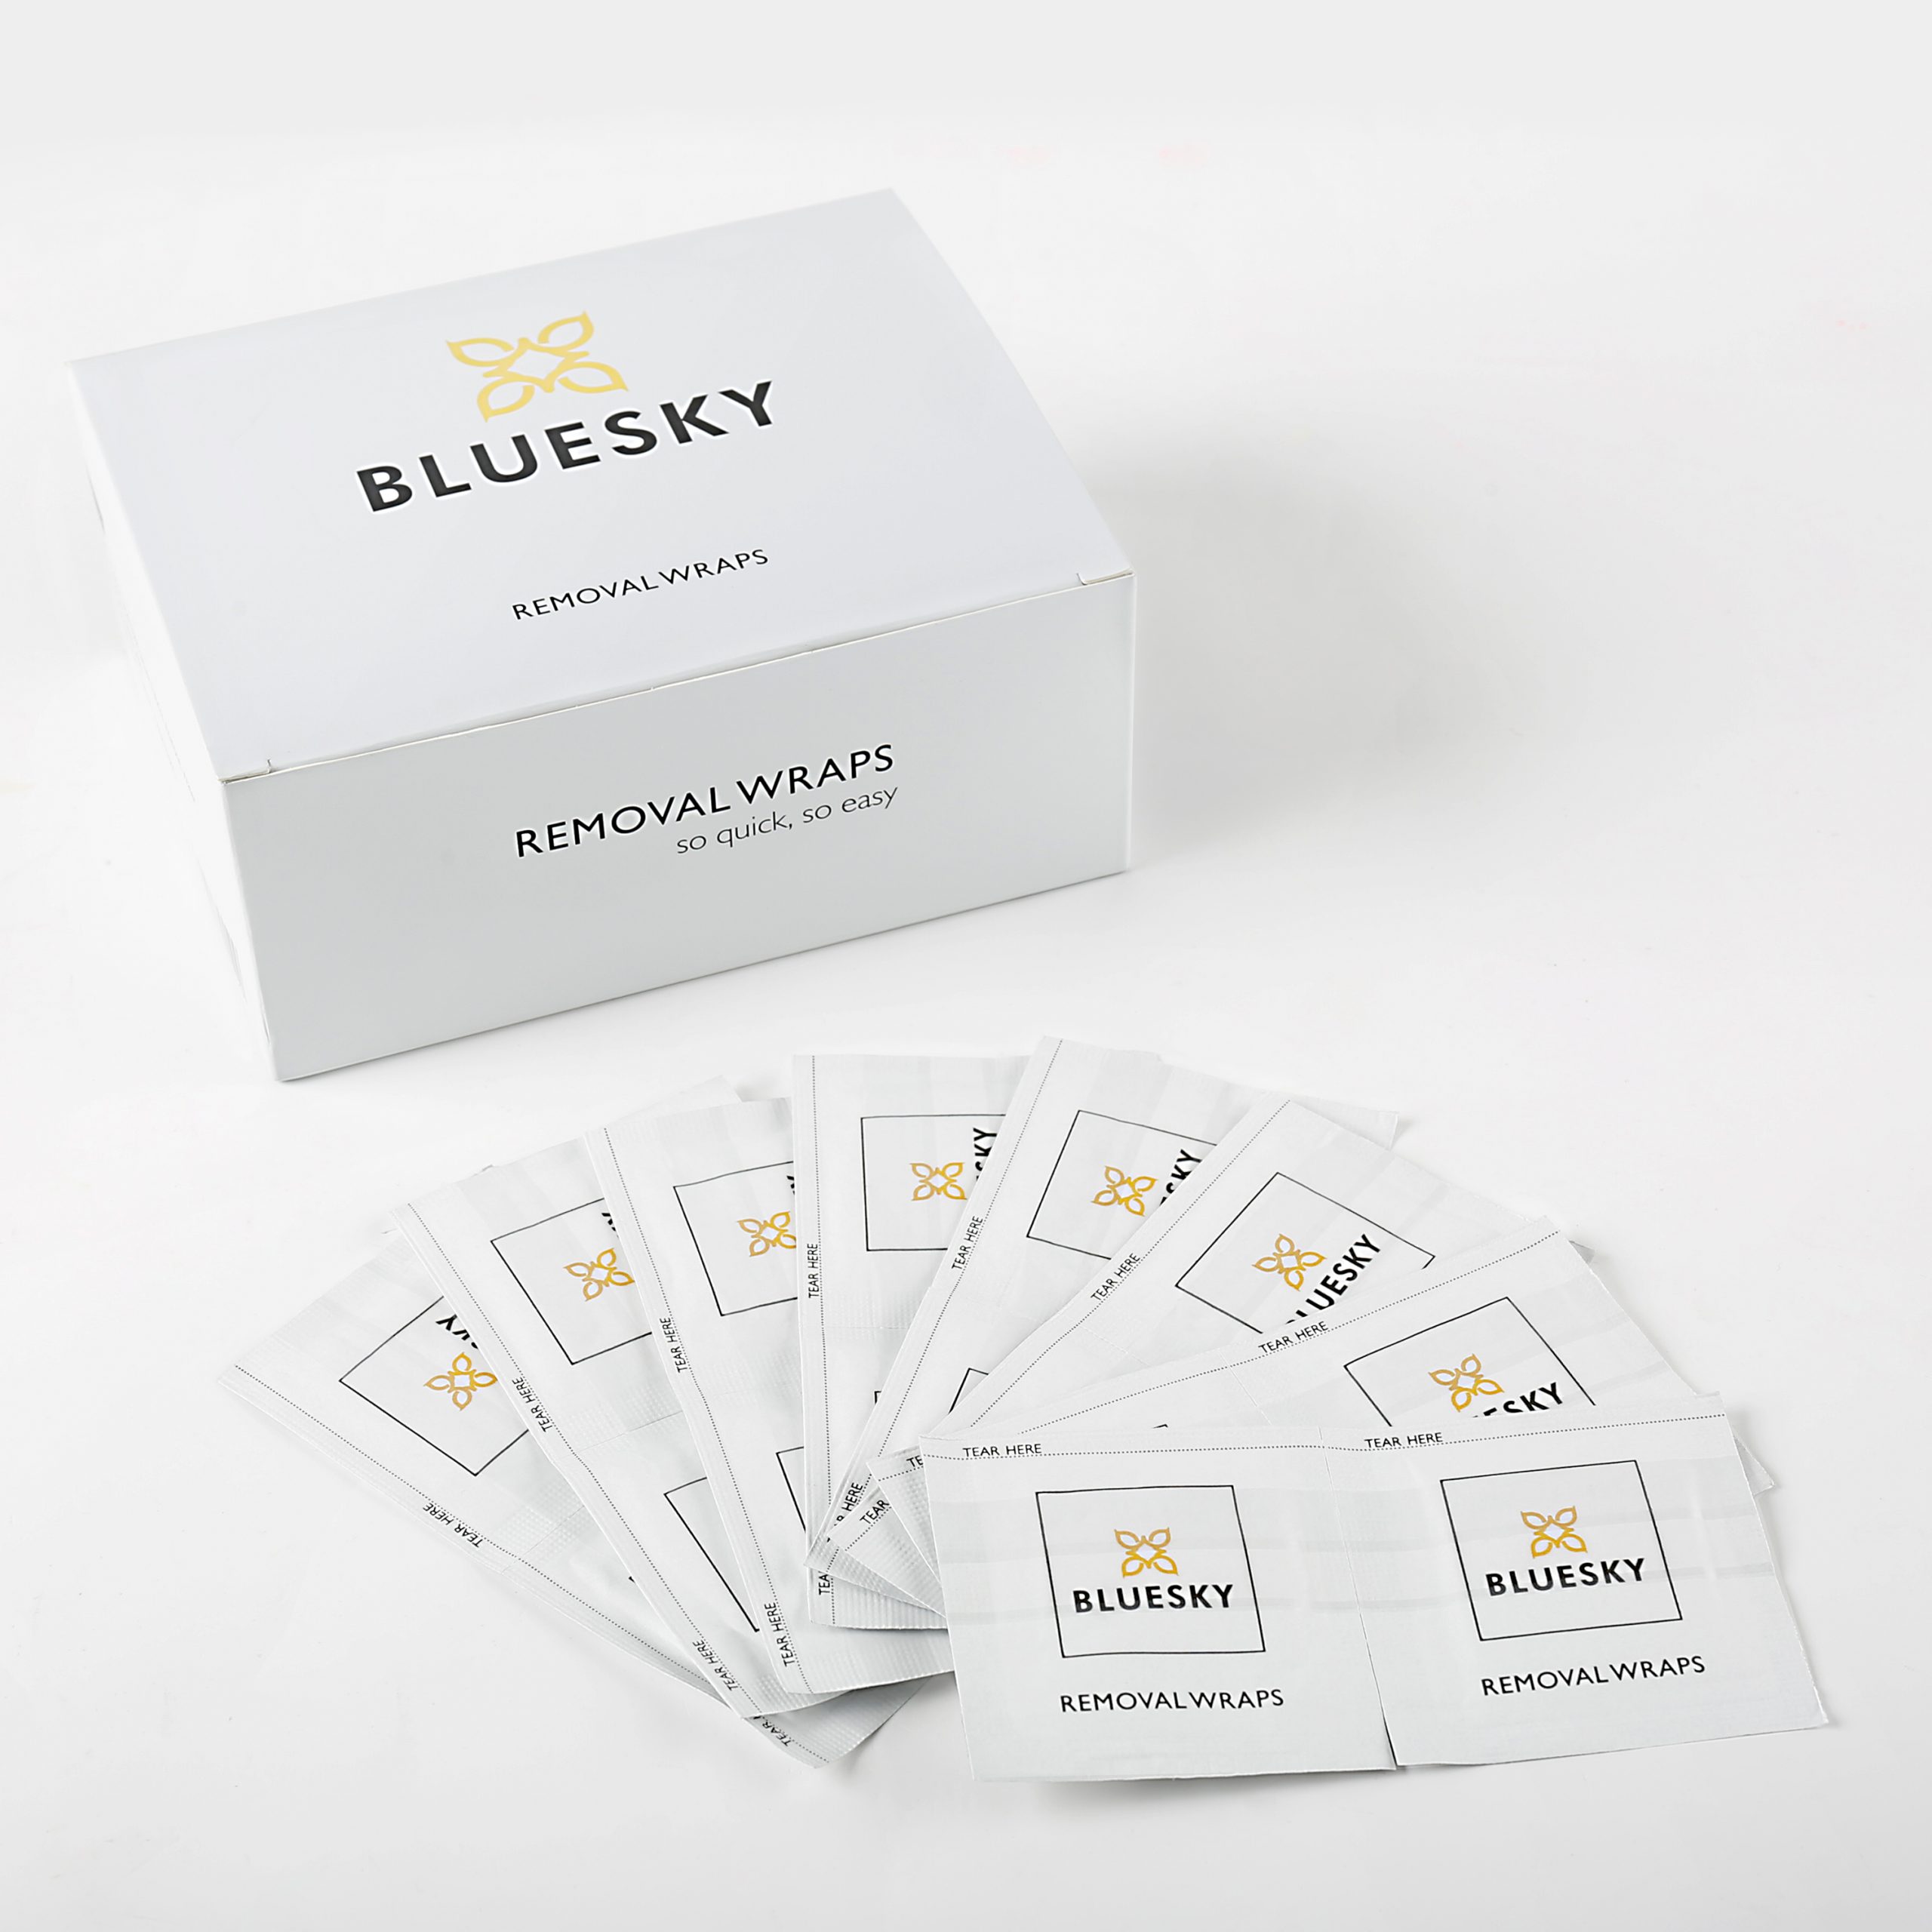 blueskygel.gr Cleansers & Removers Remover Wipes (200pcs)